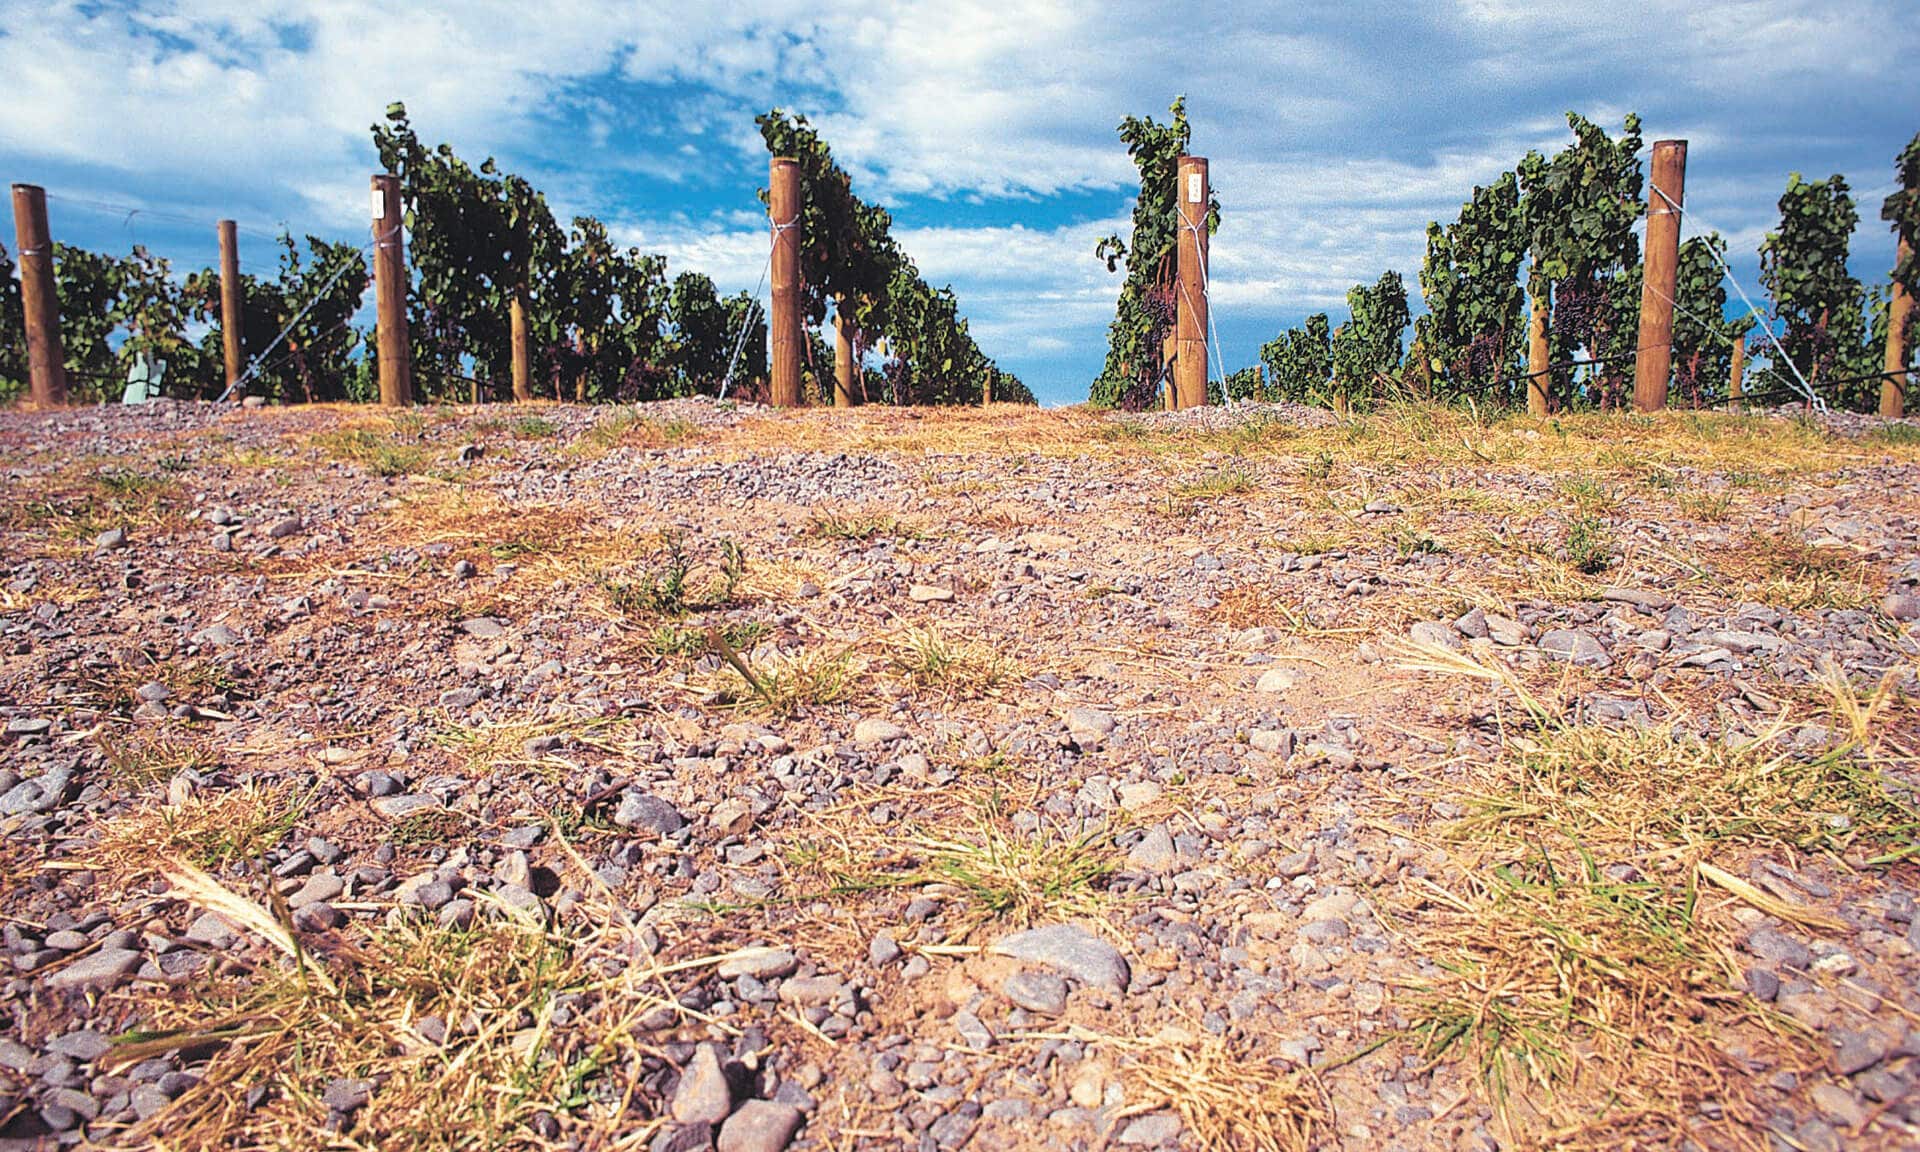 Foreground of soil with rock embedded in it, vines in the background